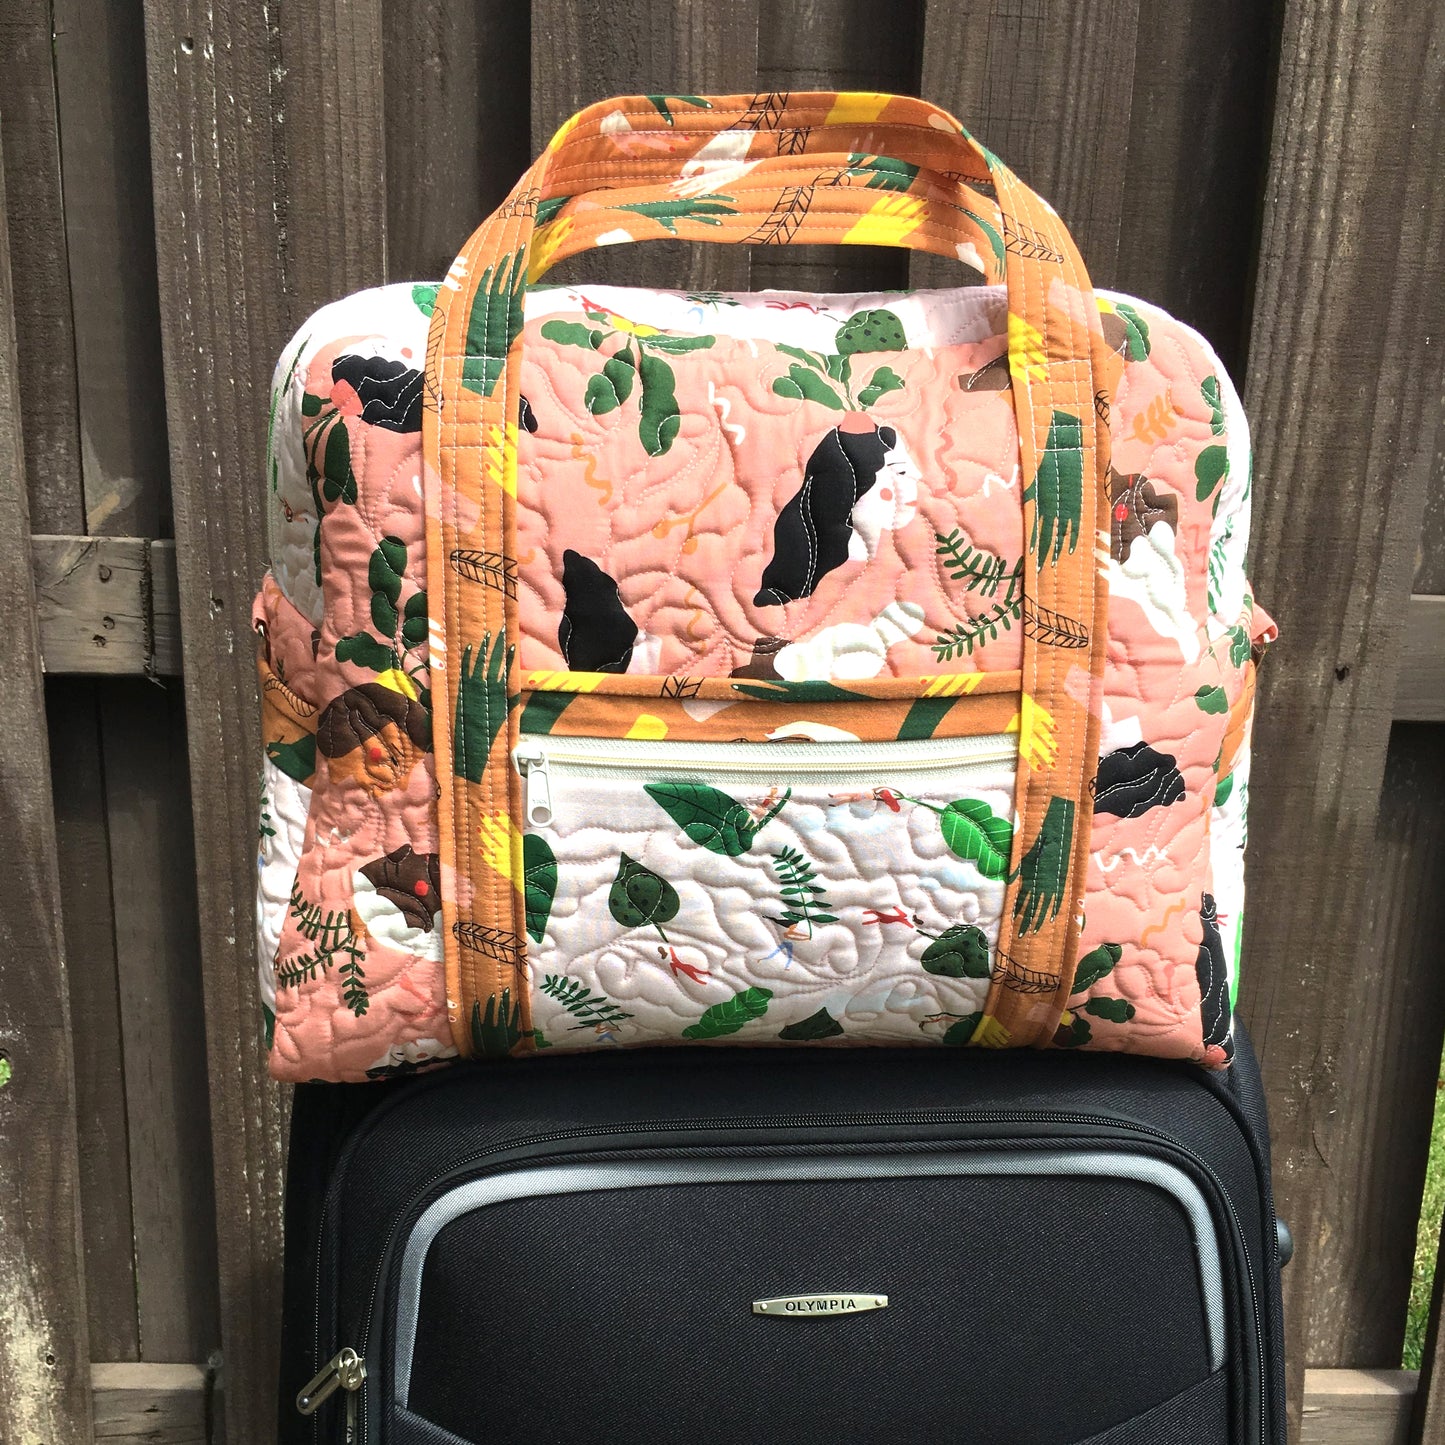 The Ultimate Travel Bag pattern